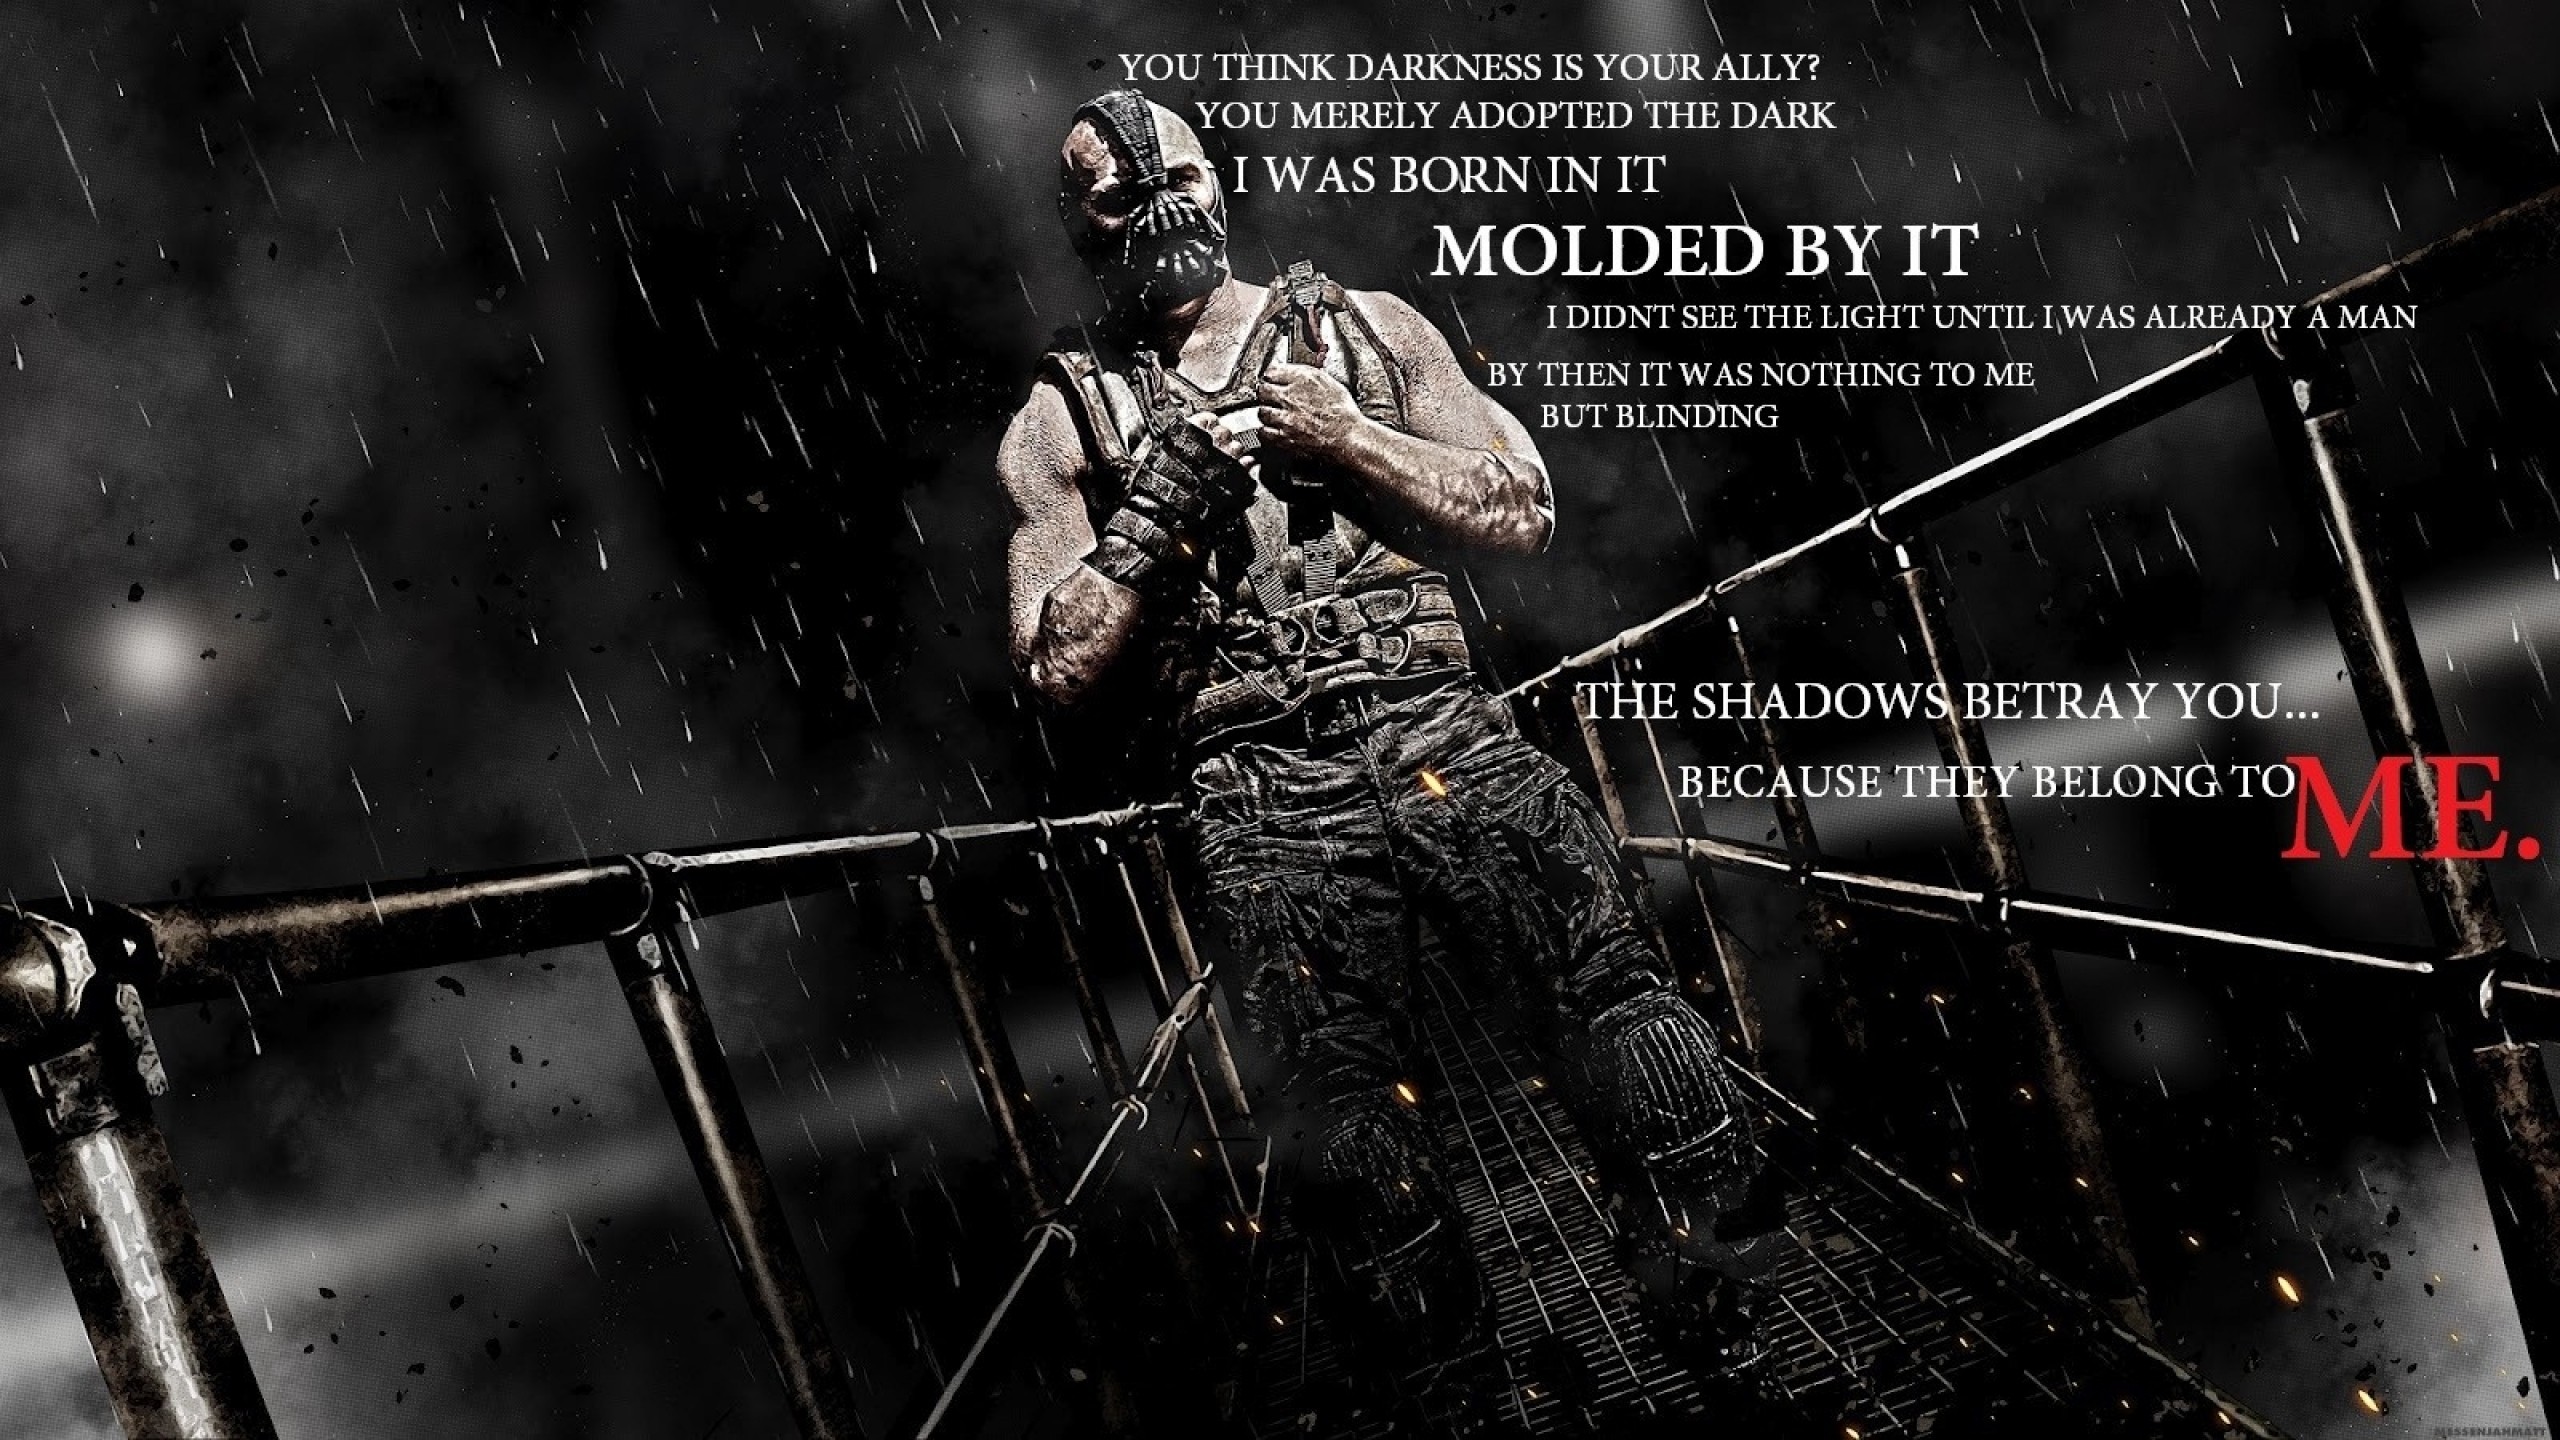 General 2560x1440 anime movies The Dark Knight Rises Bane Tom Hardy typography quote Dark Knight Trilogy Batman villains muscles muscular digital art text